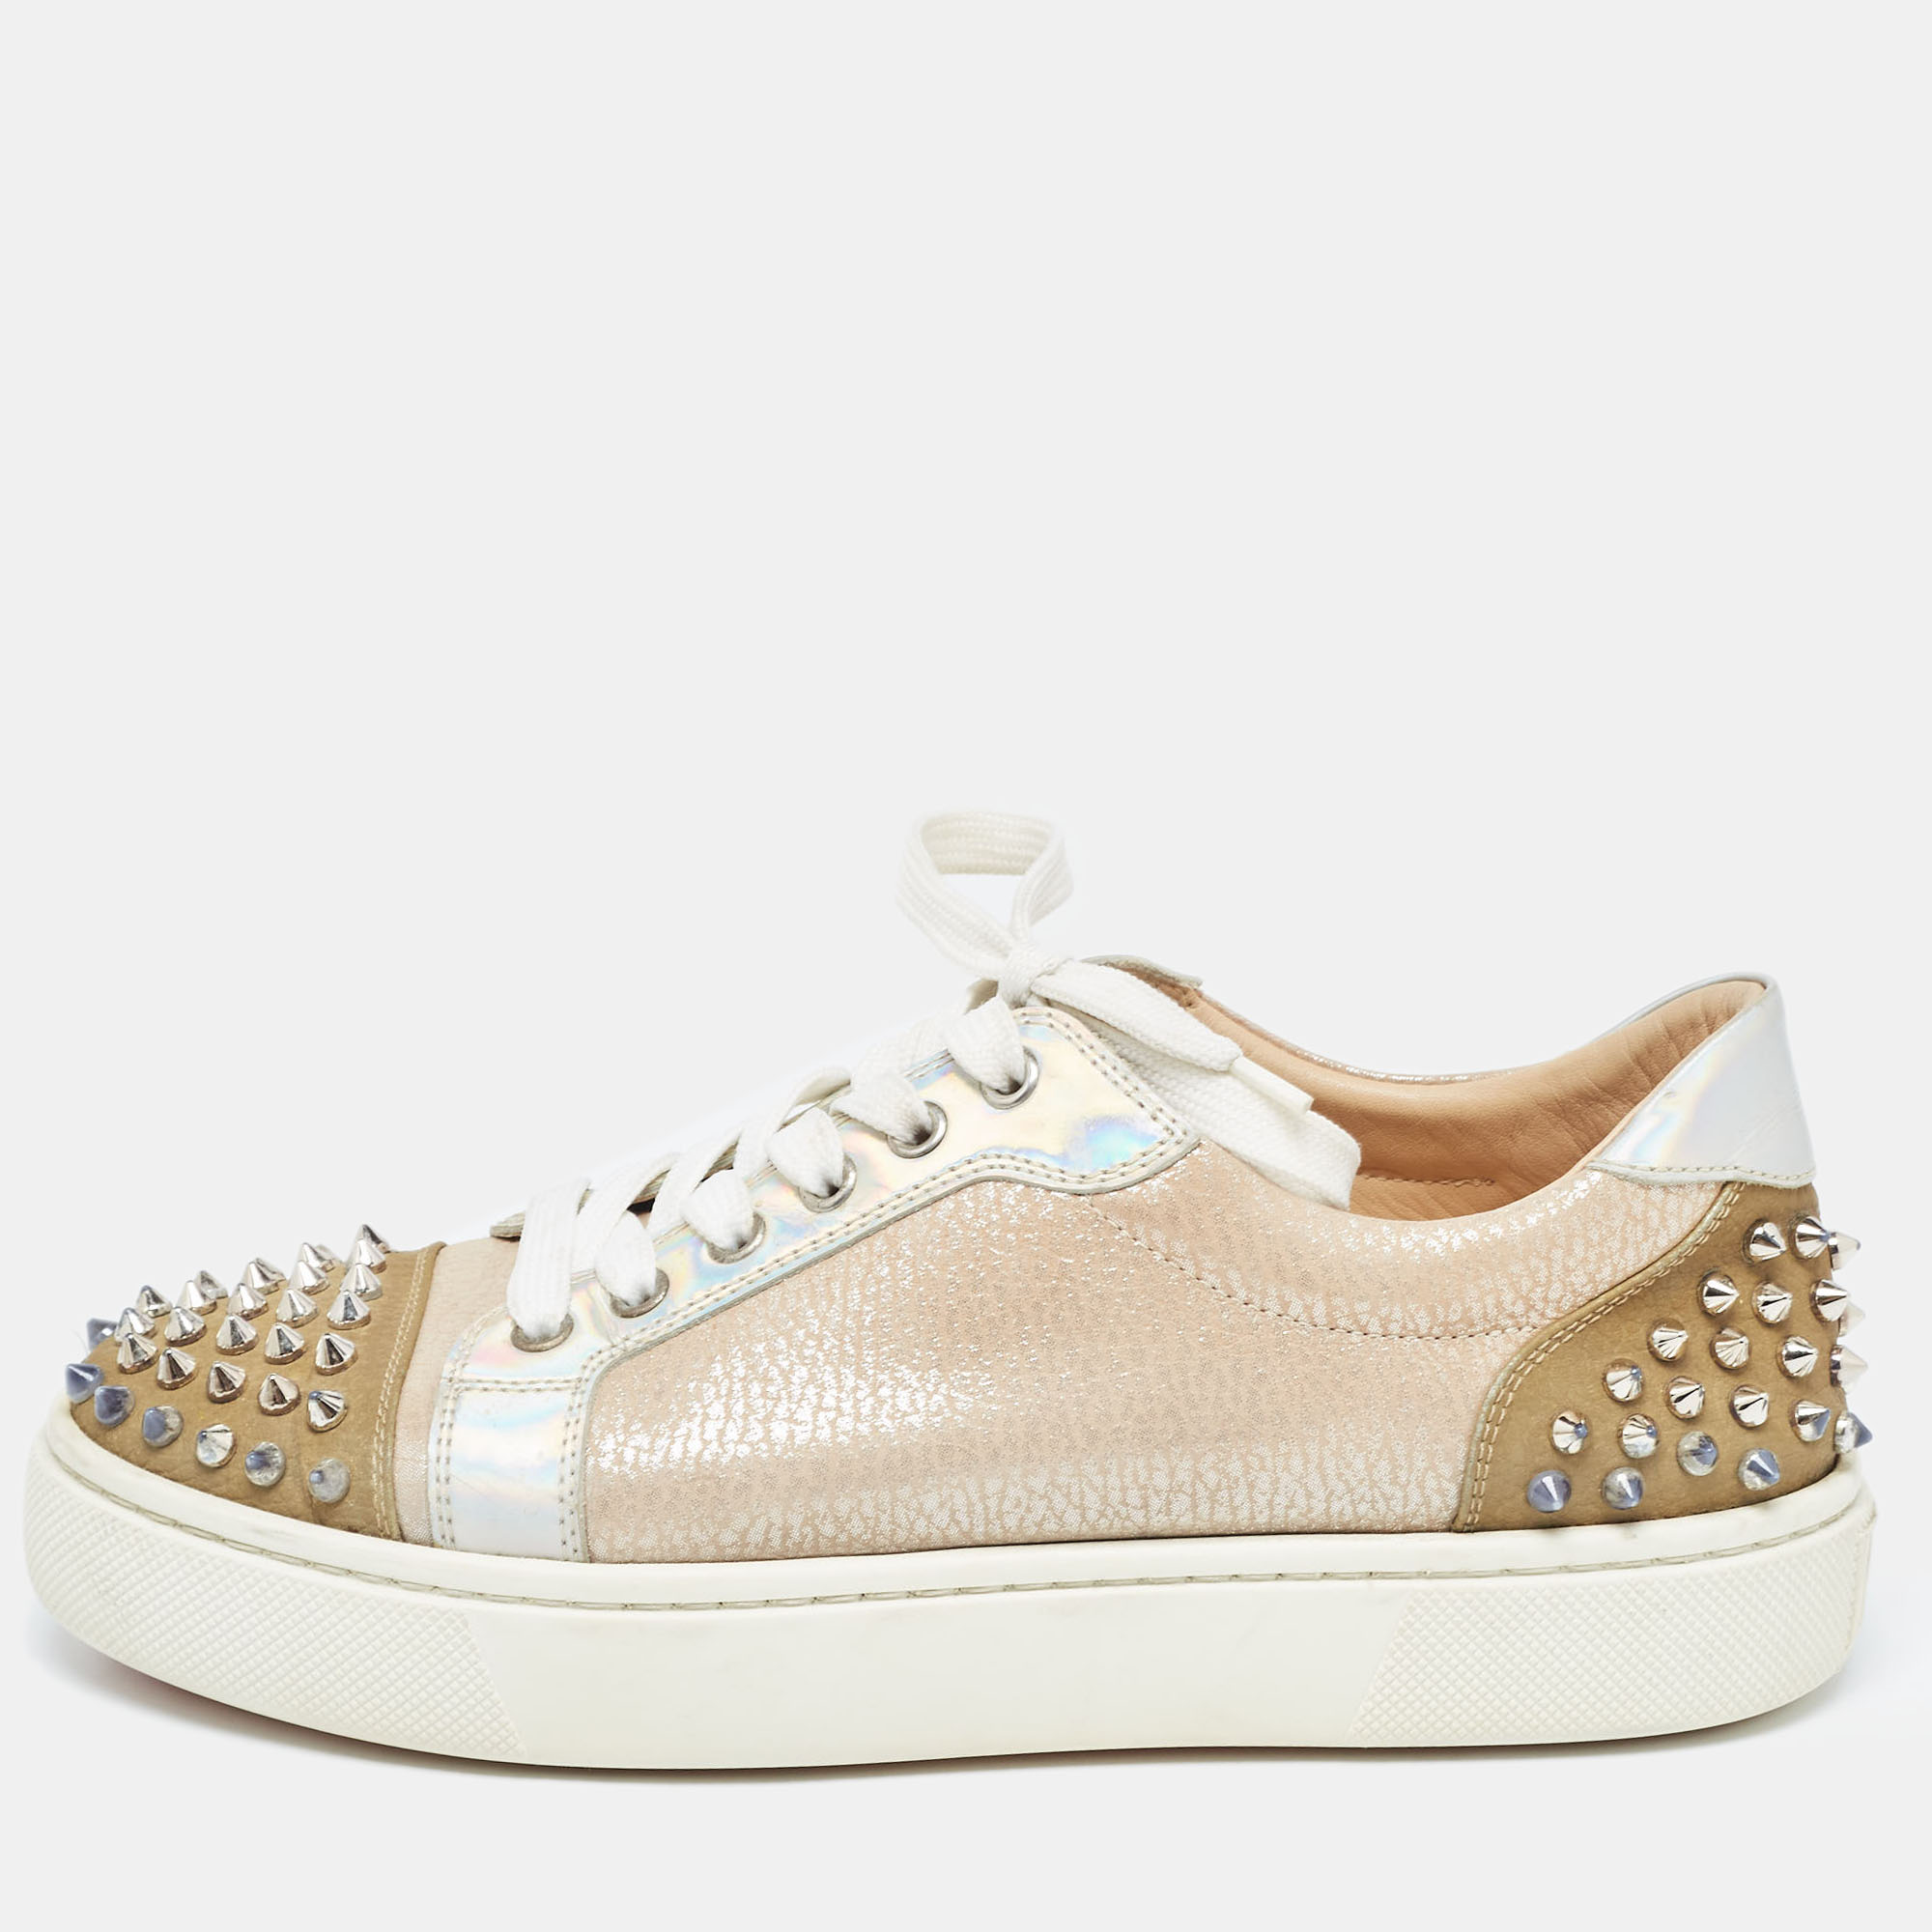 Pre-owned Christian Louboutin Multicolor Nubuck And Leather Louis Junior Spikes Sneakers Size 39.5